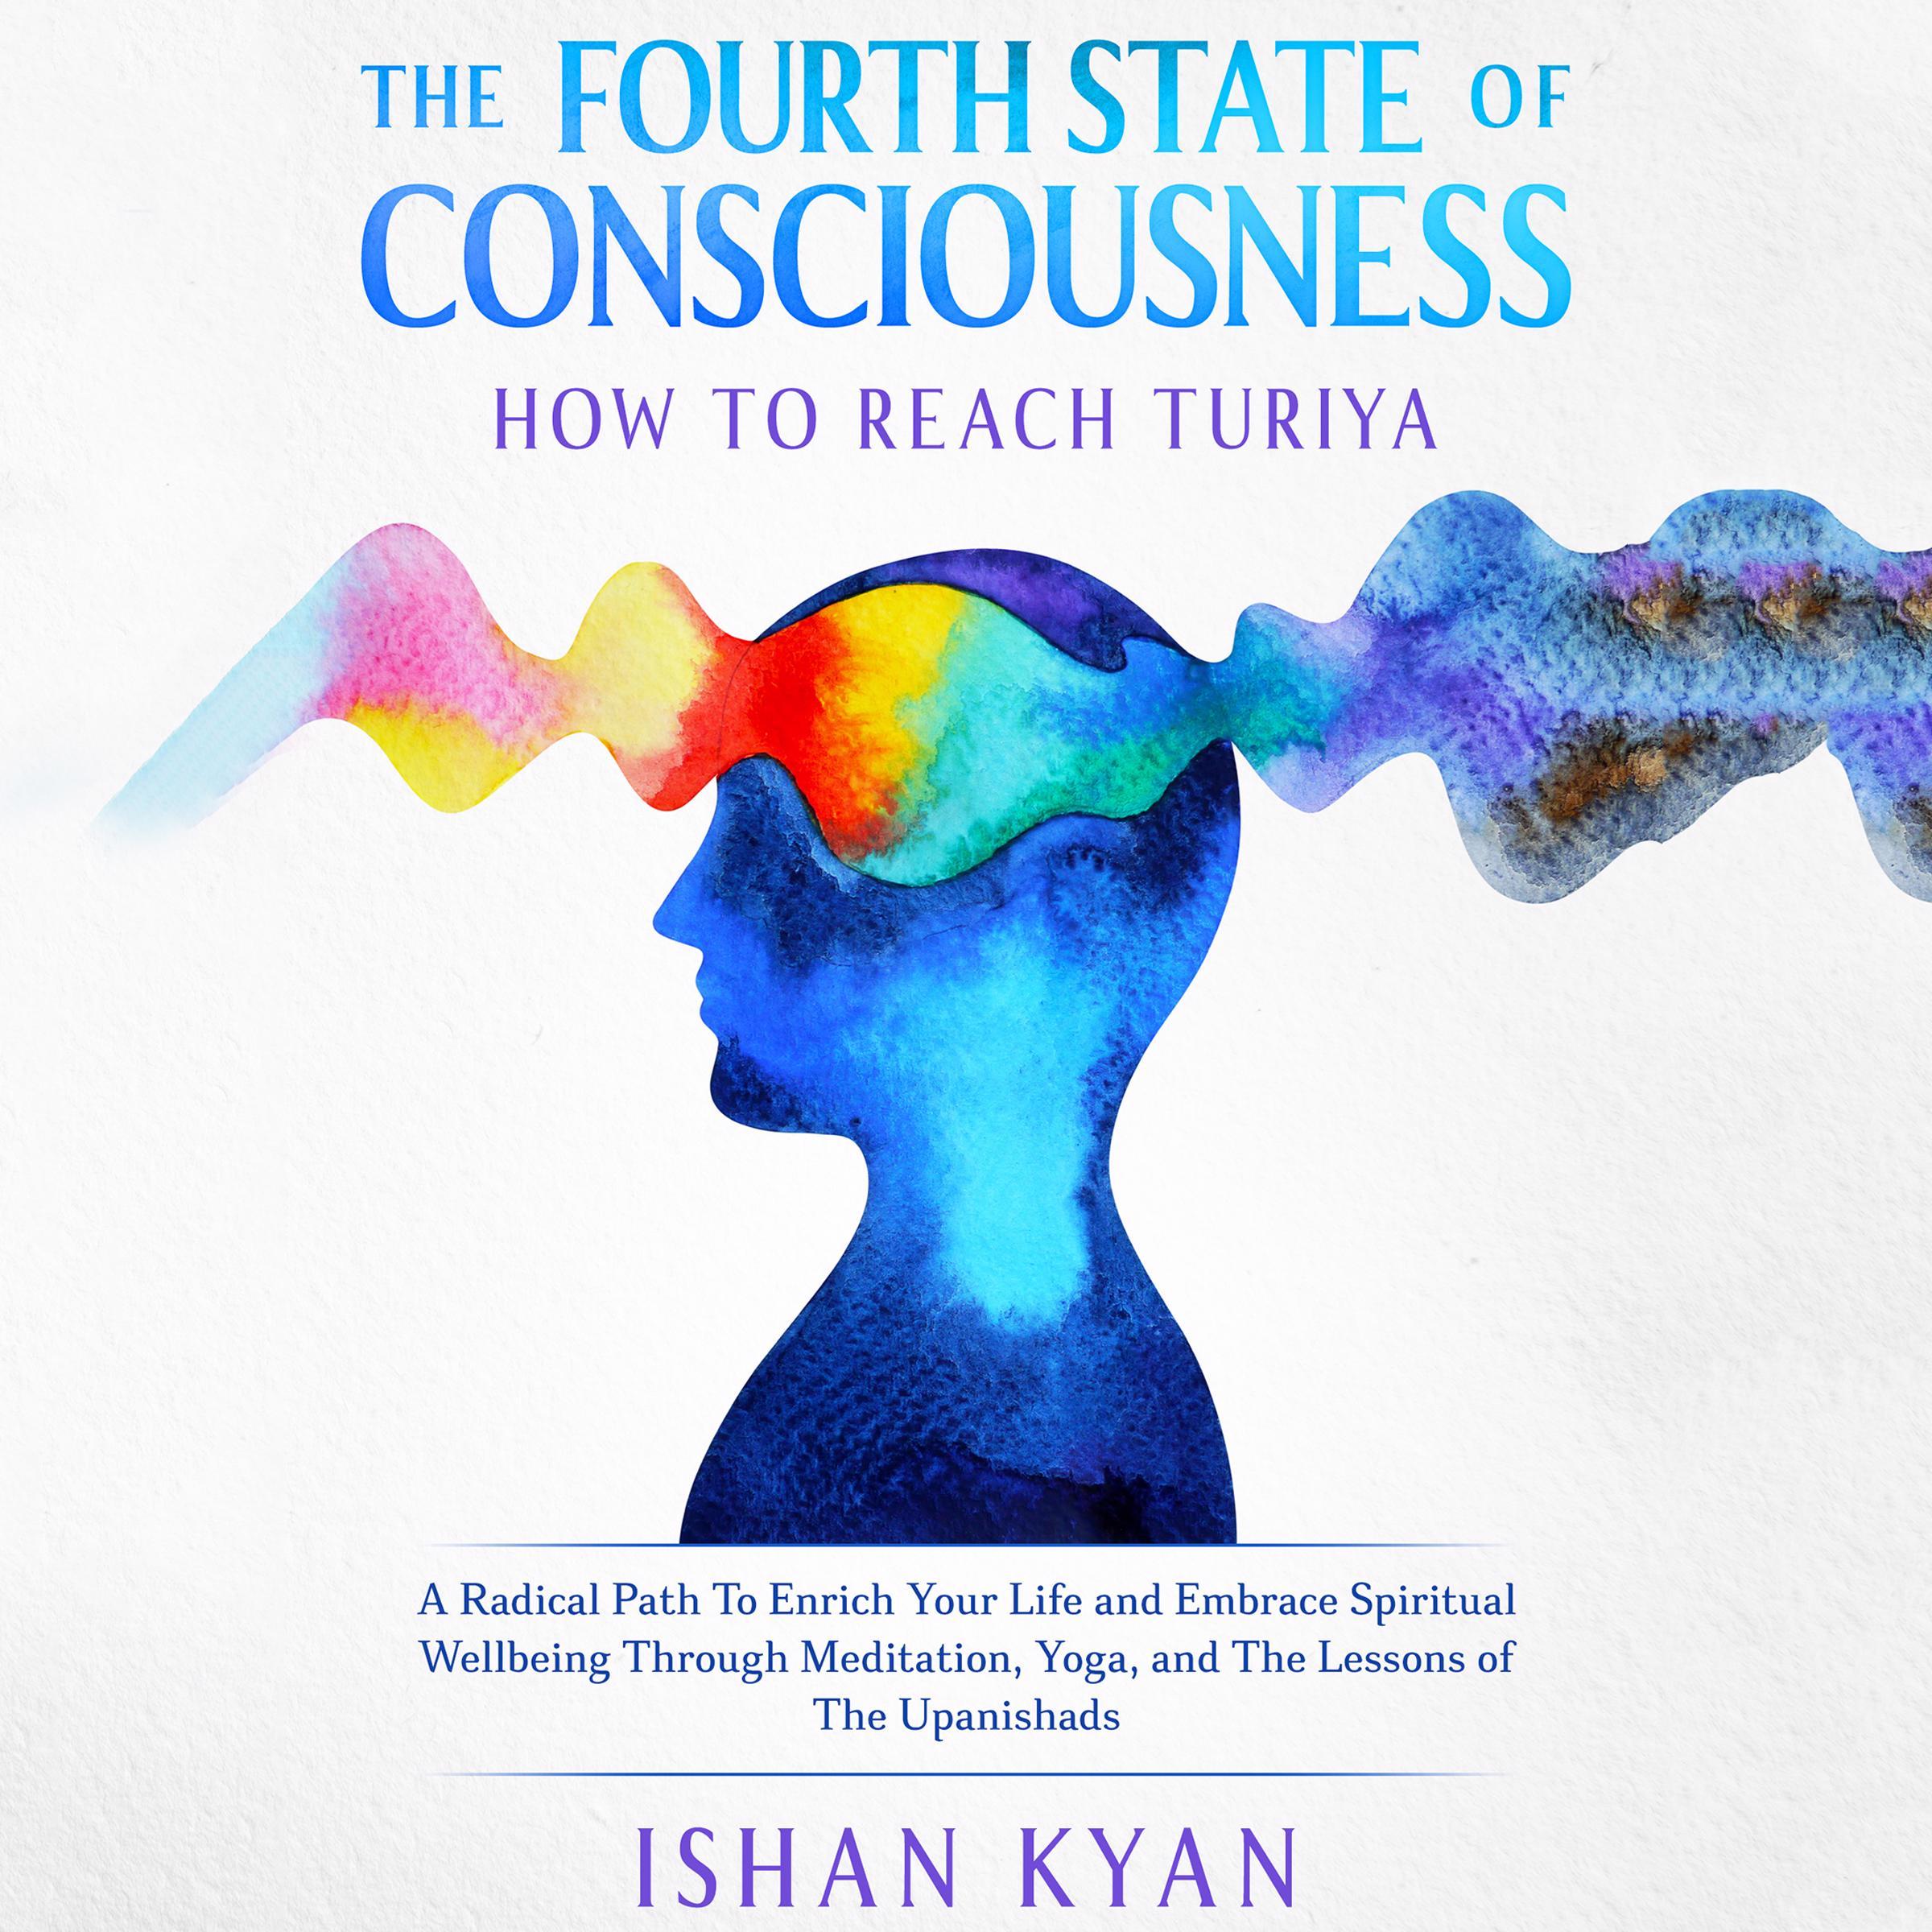 The Fourth State of Consciousness - How to reach Turiya